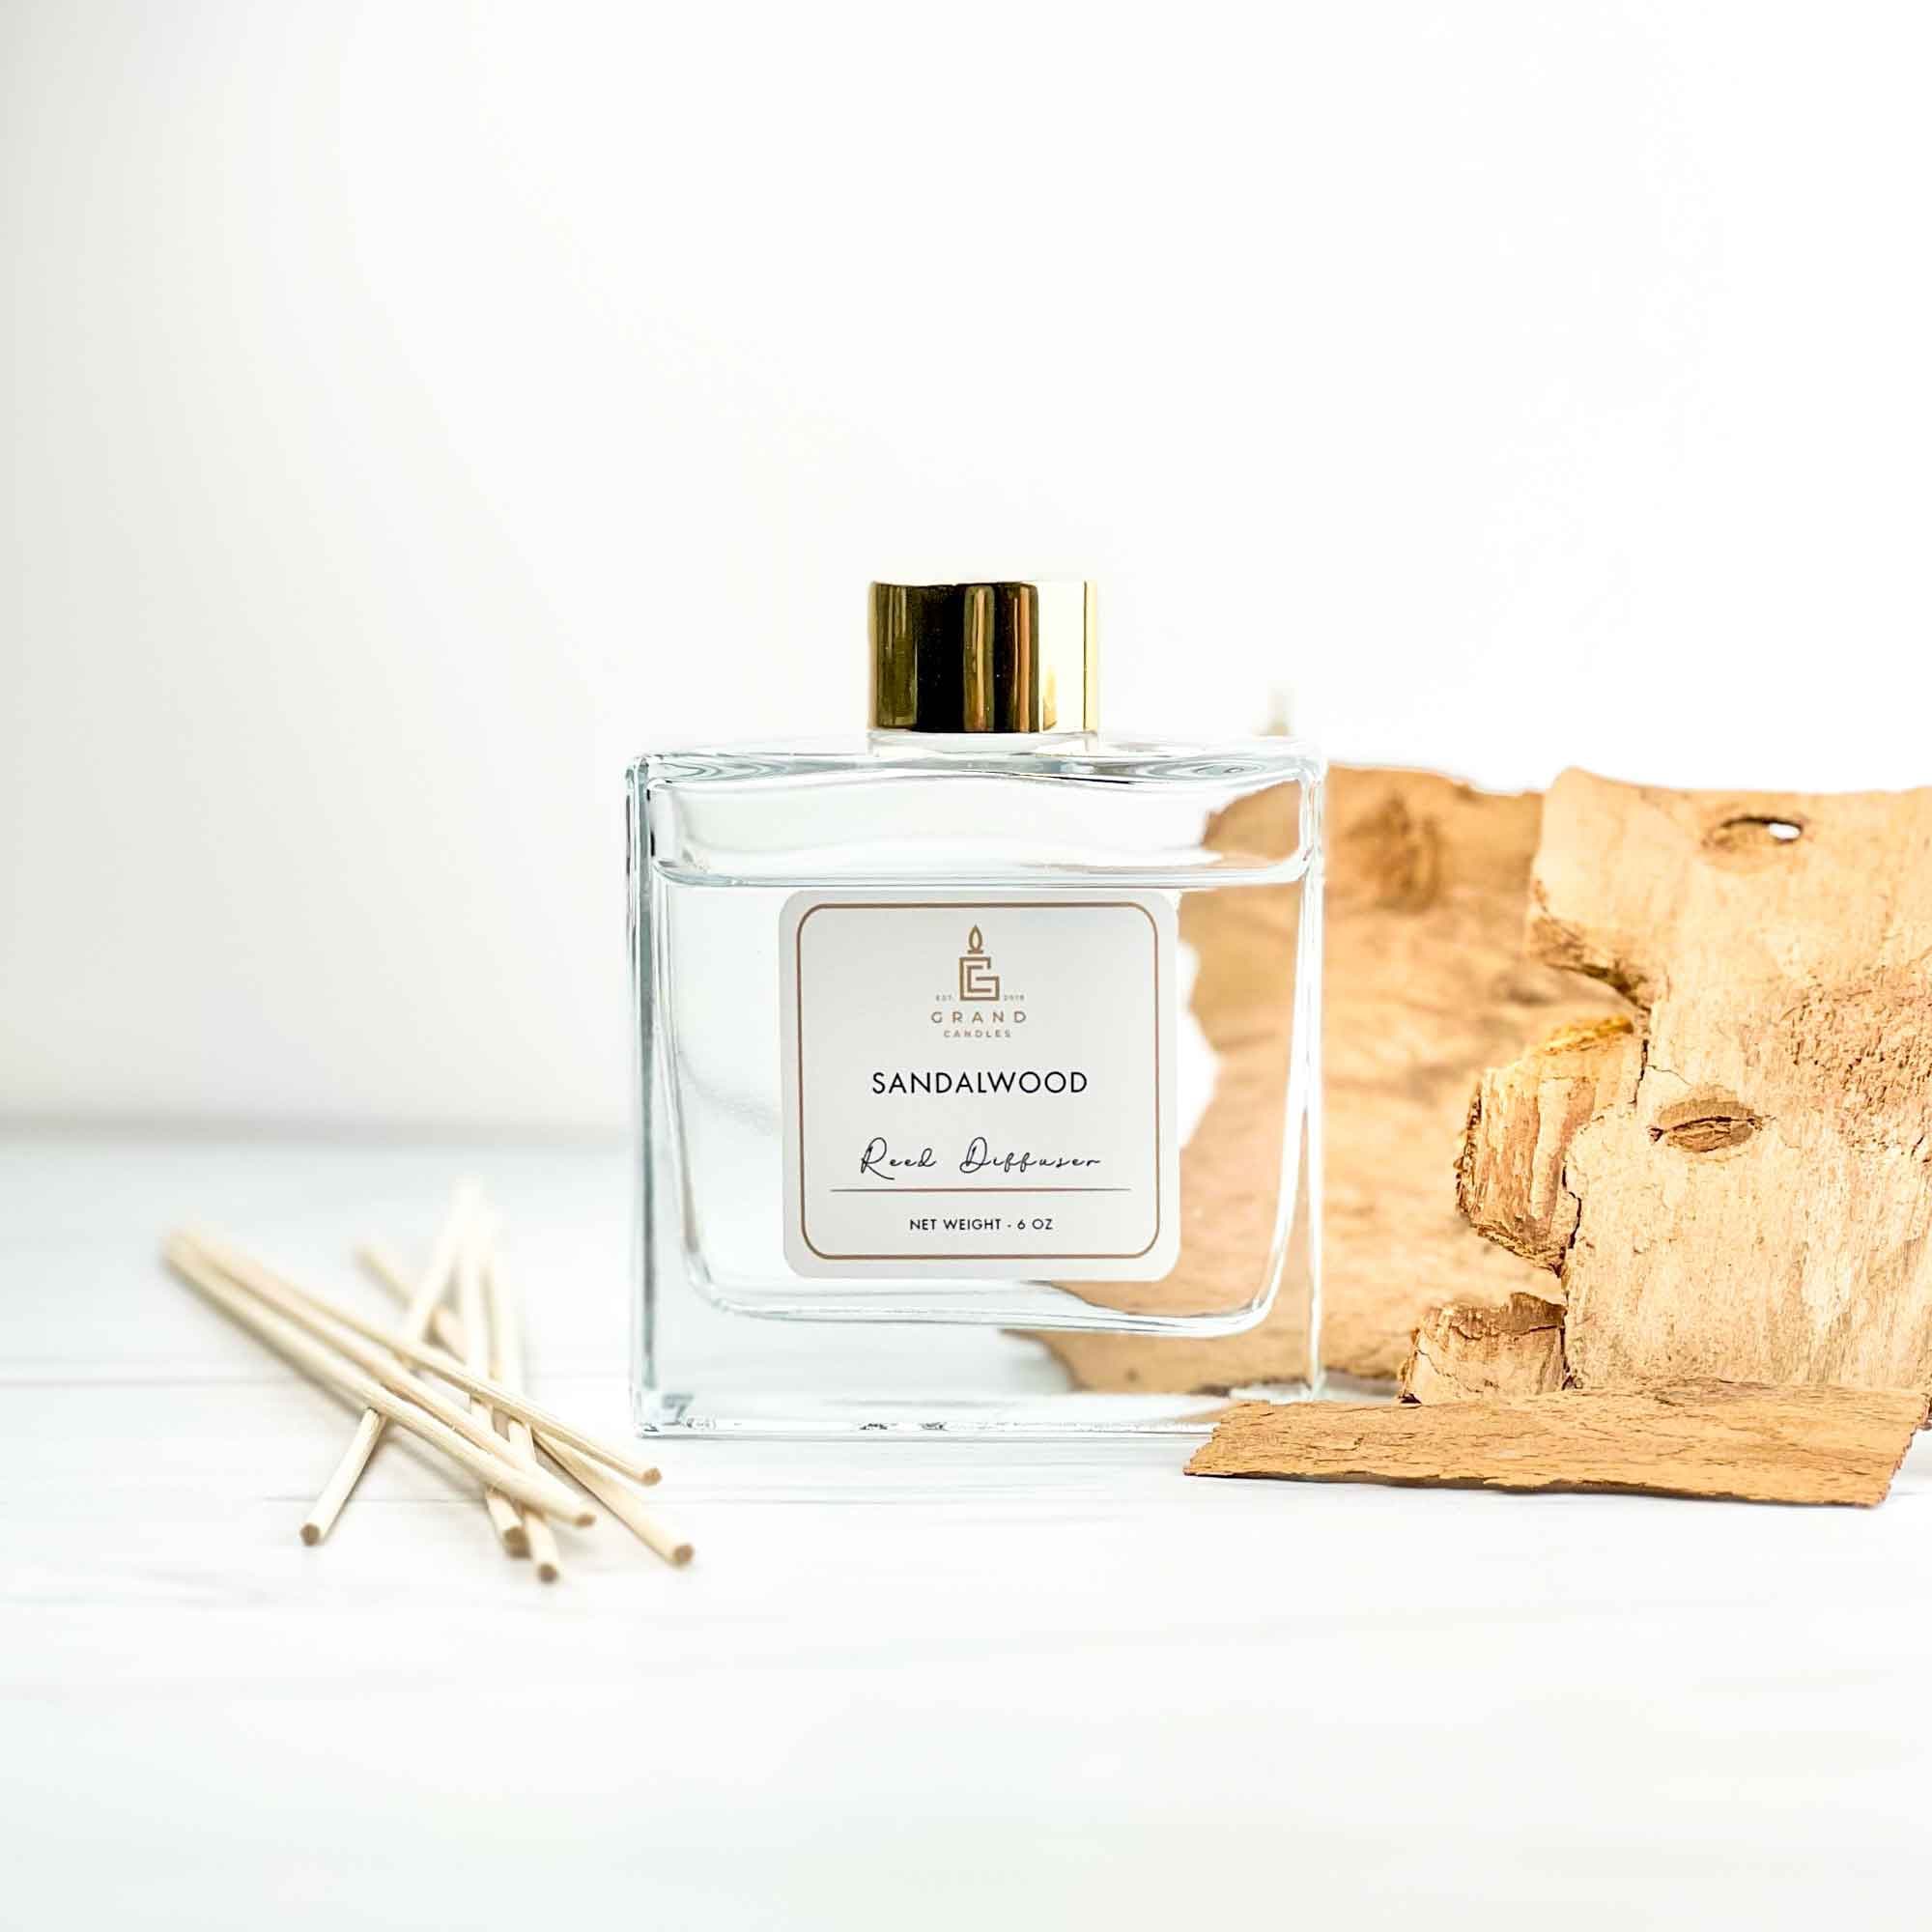 Handcrafted Sandalwood Reed Diffuser with Essential Oils - Perfect Home Decor Gift for Aromatherapy and Relaxation